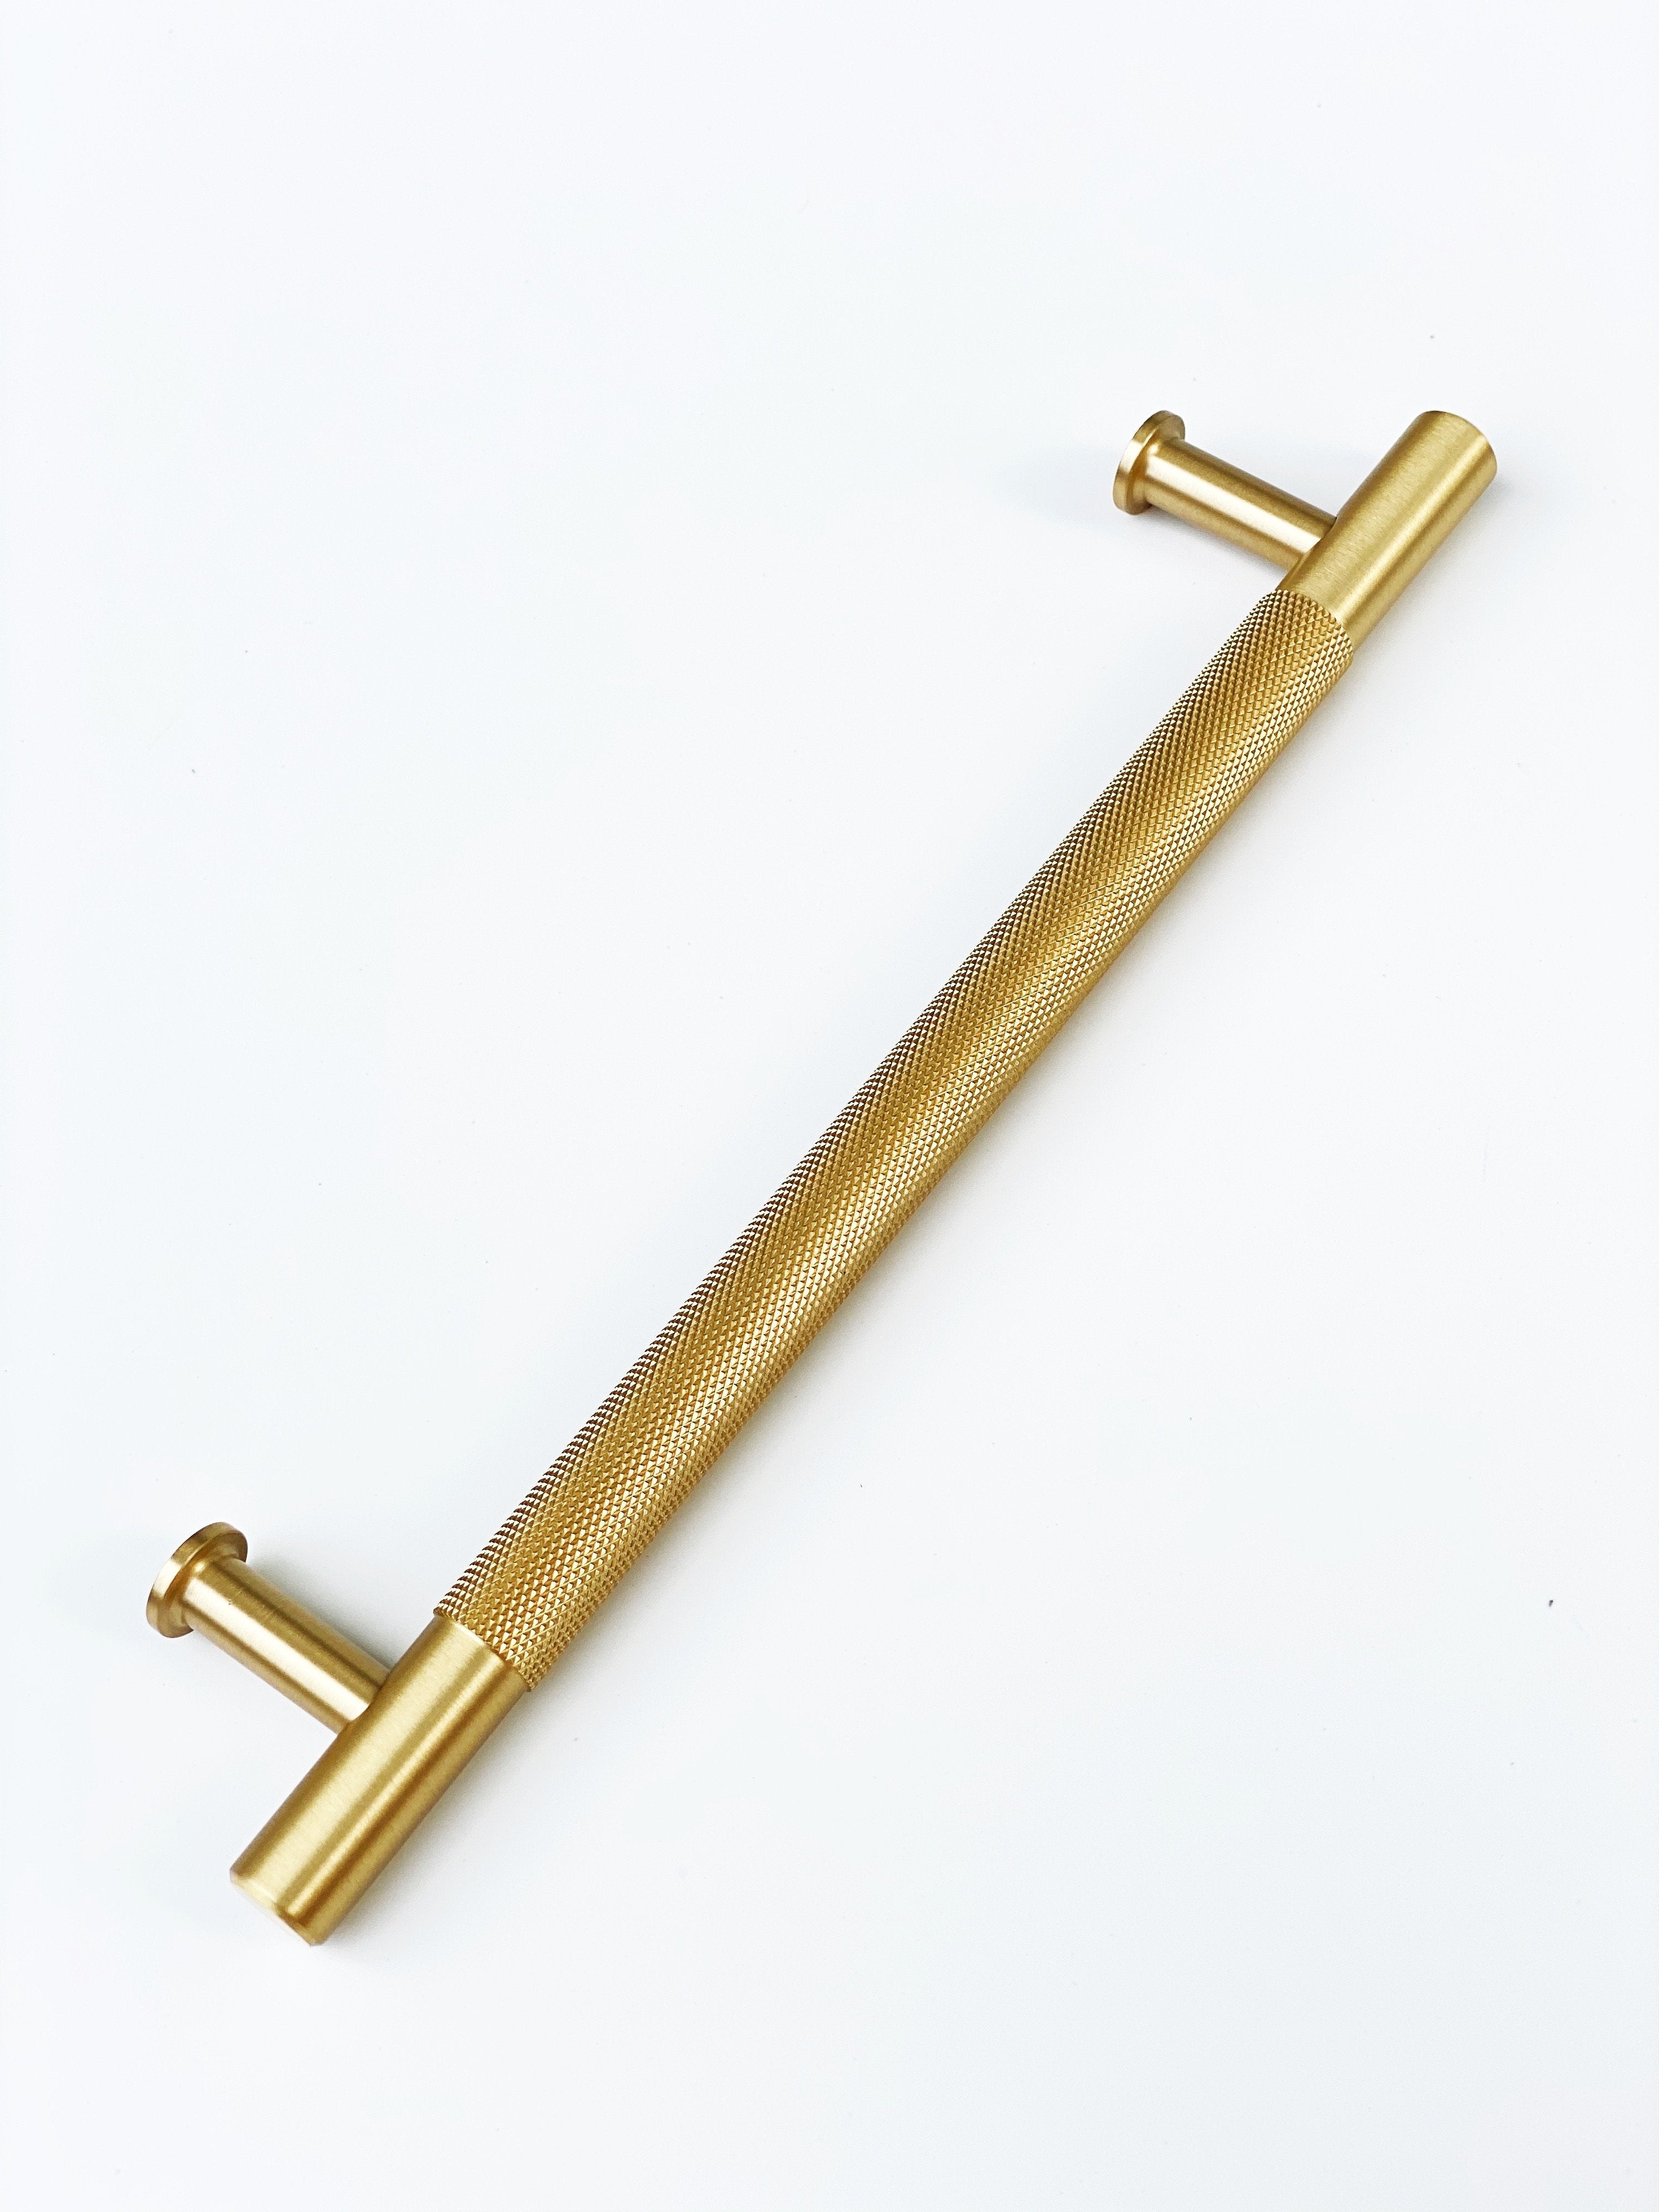 Brass Solid "Texture No.2" Knurled Drawer Pulls and Knobs in Satin Brass | Pulls